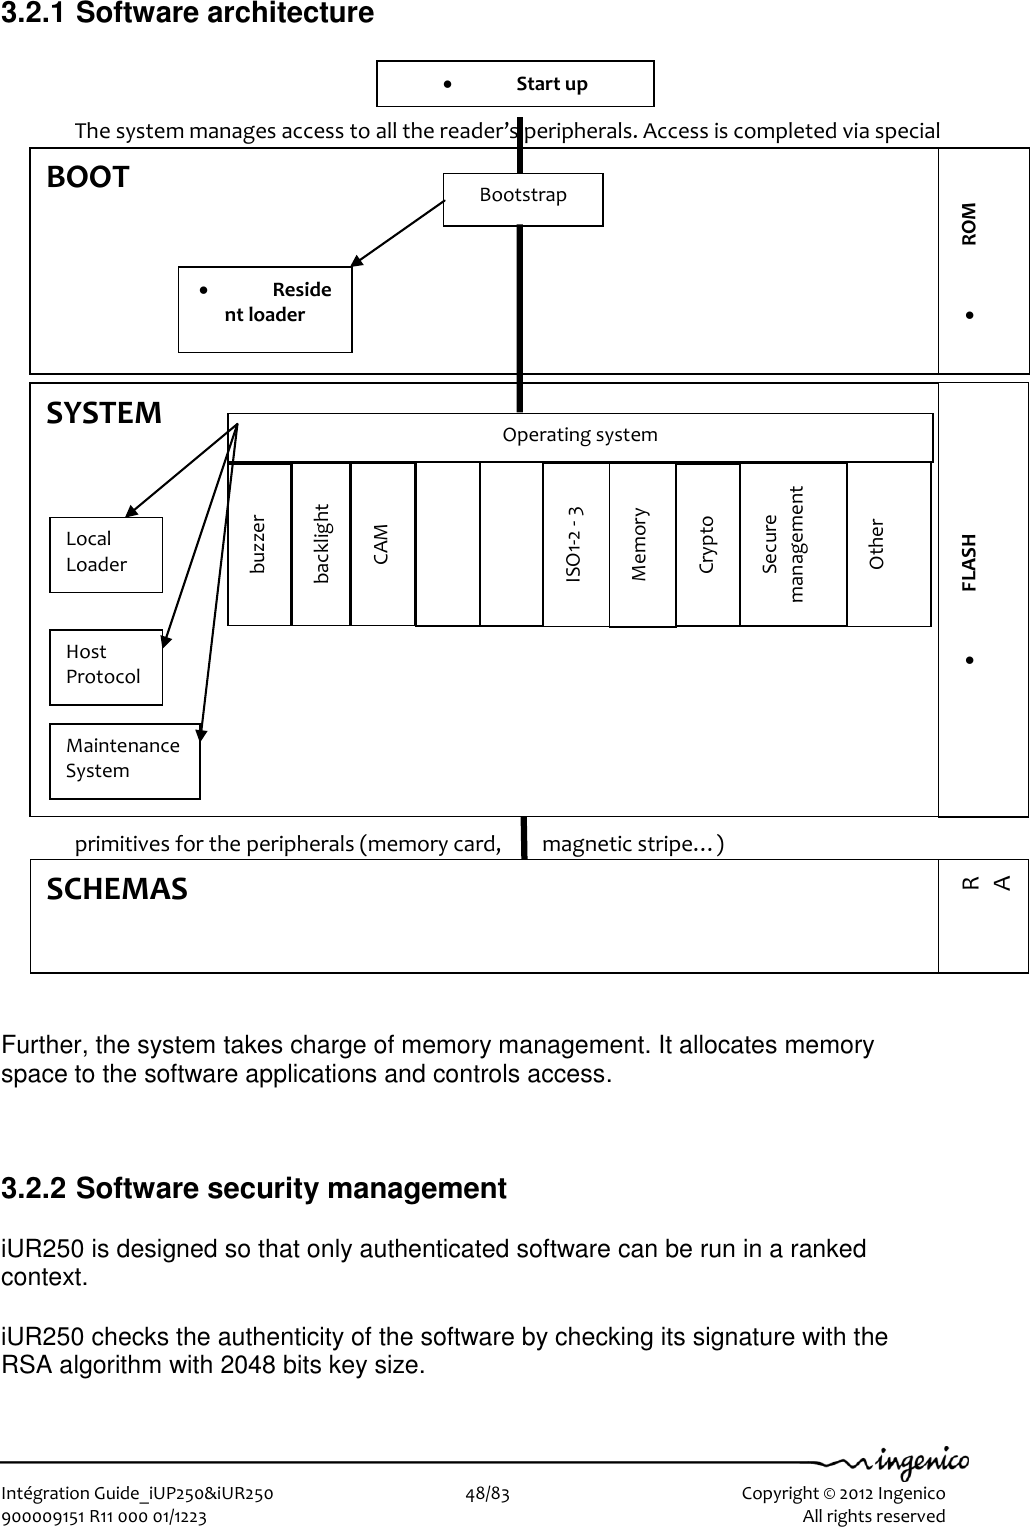   Intégration Guide_iUP250&amp;iUR250                        48/83    Copyright © 2012 Ingenico 900009151 R11 000 01/1223      All rights reserved   3.2.1 Software architecture    The system manages access to all the reader’s peripherals. Access is completed via special primitives for the peripherals (memory card,  magnetic stripe…)   Further, the system takes charge of memory management. It allocates memory space to the software applications and controls access.    3.2.2 Software security management  iUR250 is designed so that only authenticated software can be run in a ranked context.  iUR250 checks the authenticity of the software by checking its signature with the RSA algorithm with 2048 bits key size.  SCHEMAS RAM  Start up BOOT Bootstrap  Resident loader  ROM SYSTEM  Operating system buzzer backlight CAM   ISO1-2 - 3 Memory Crypto Secure management Other   FLASH Local Loader Maintenance System Host Protocol 